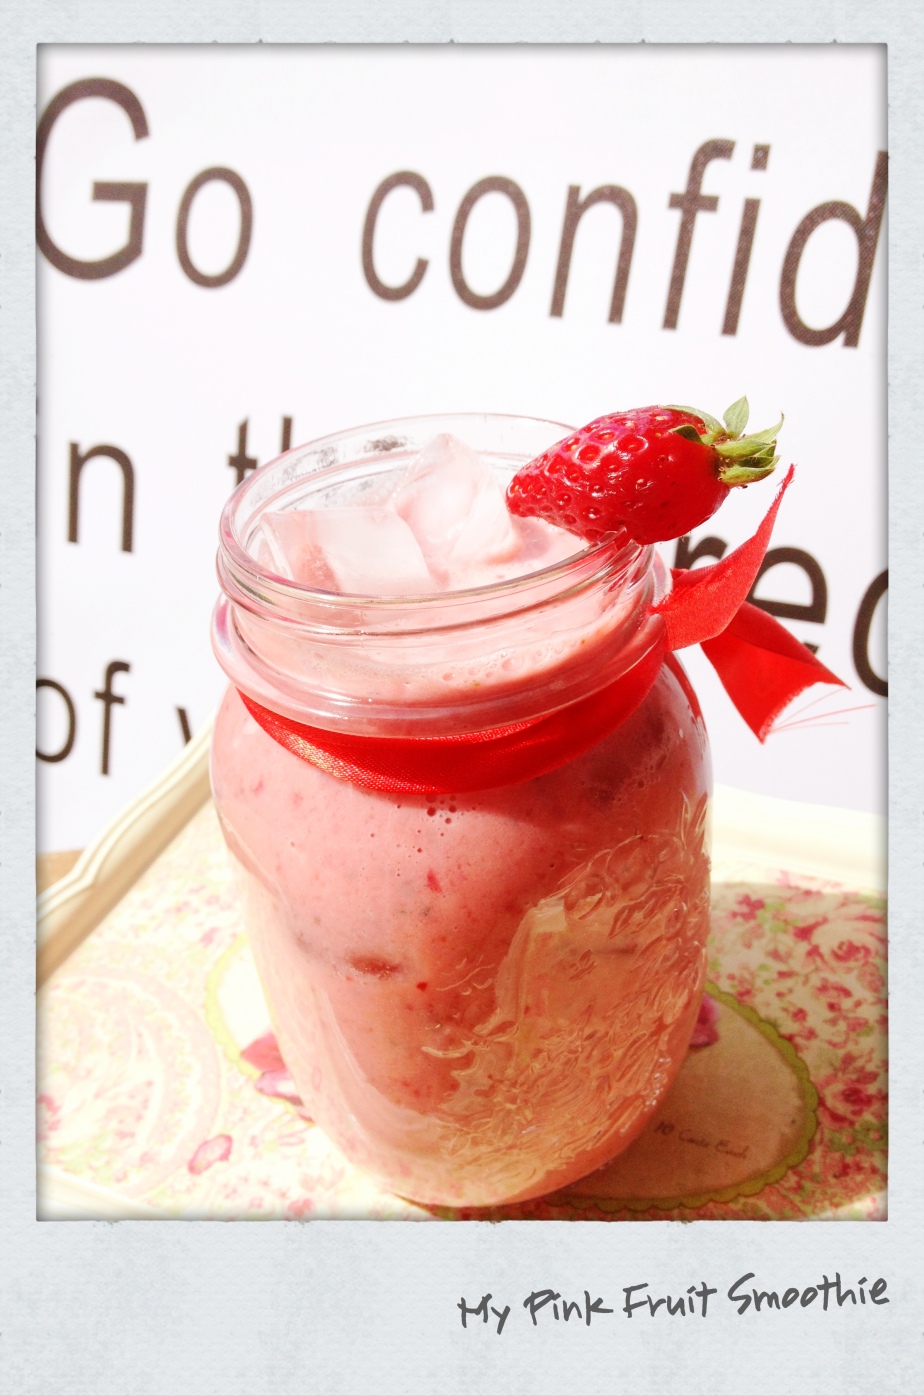 Oat’s Series 7: The PINK Smoothie!